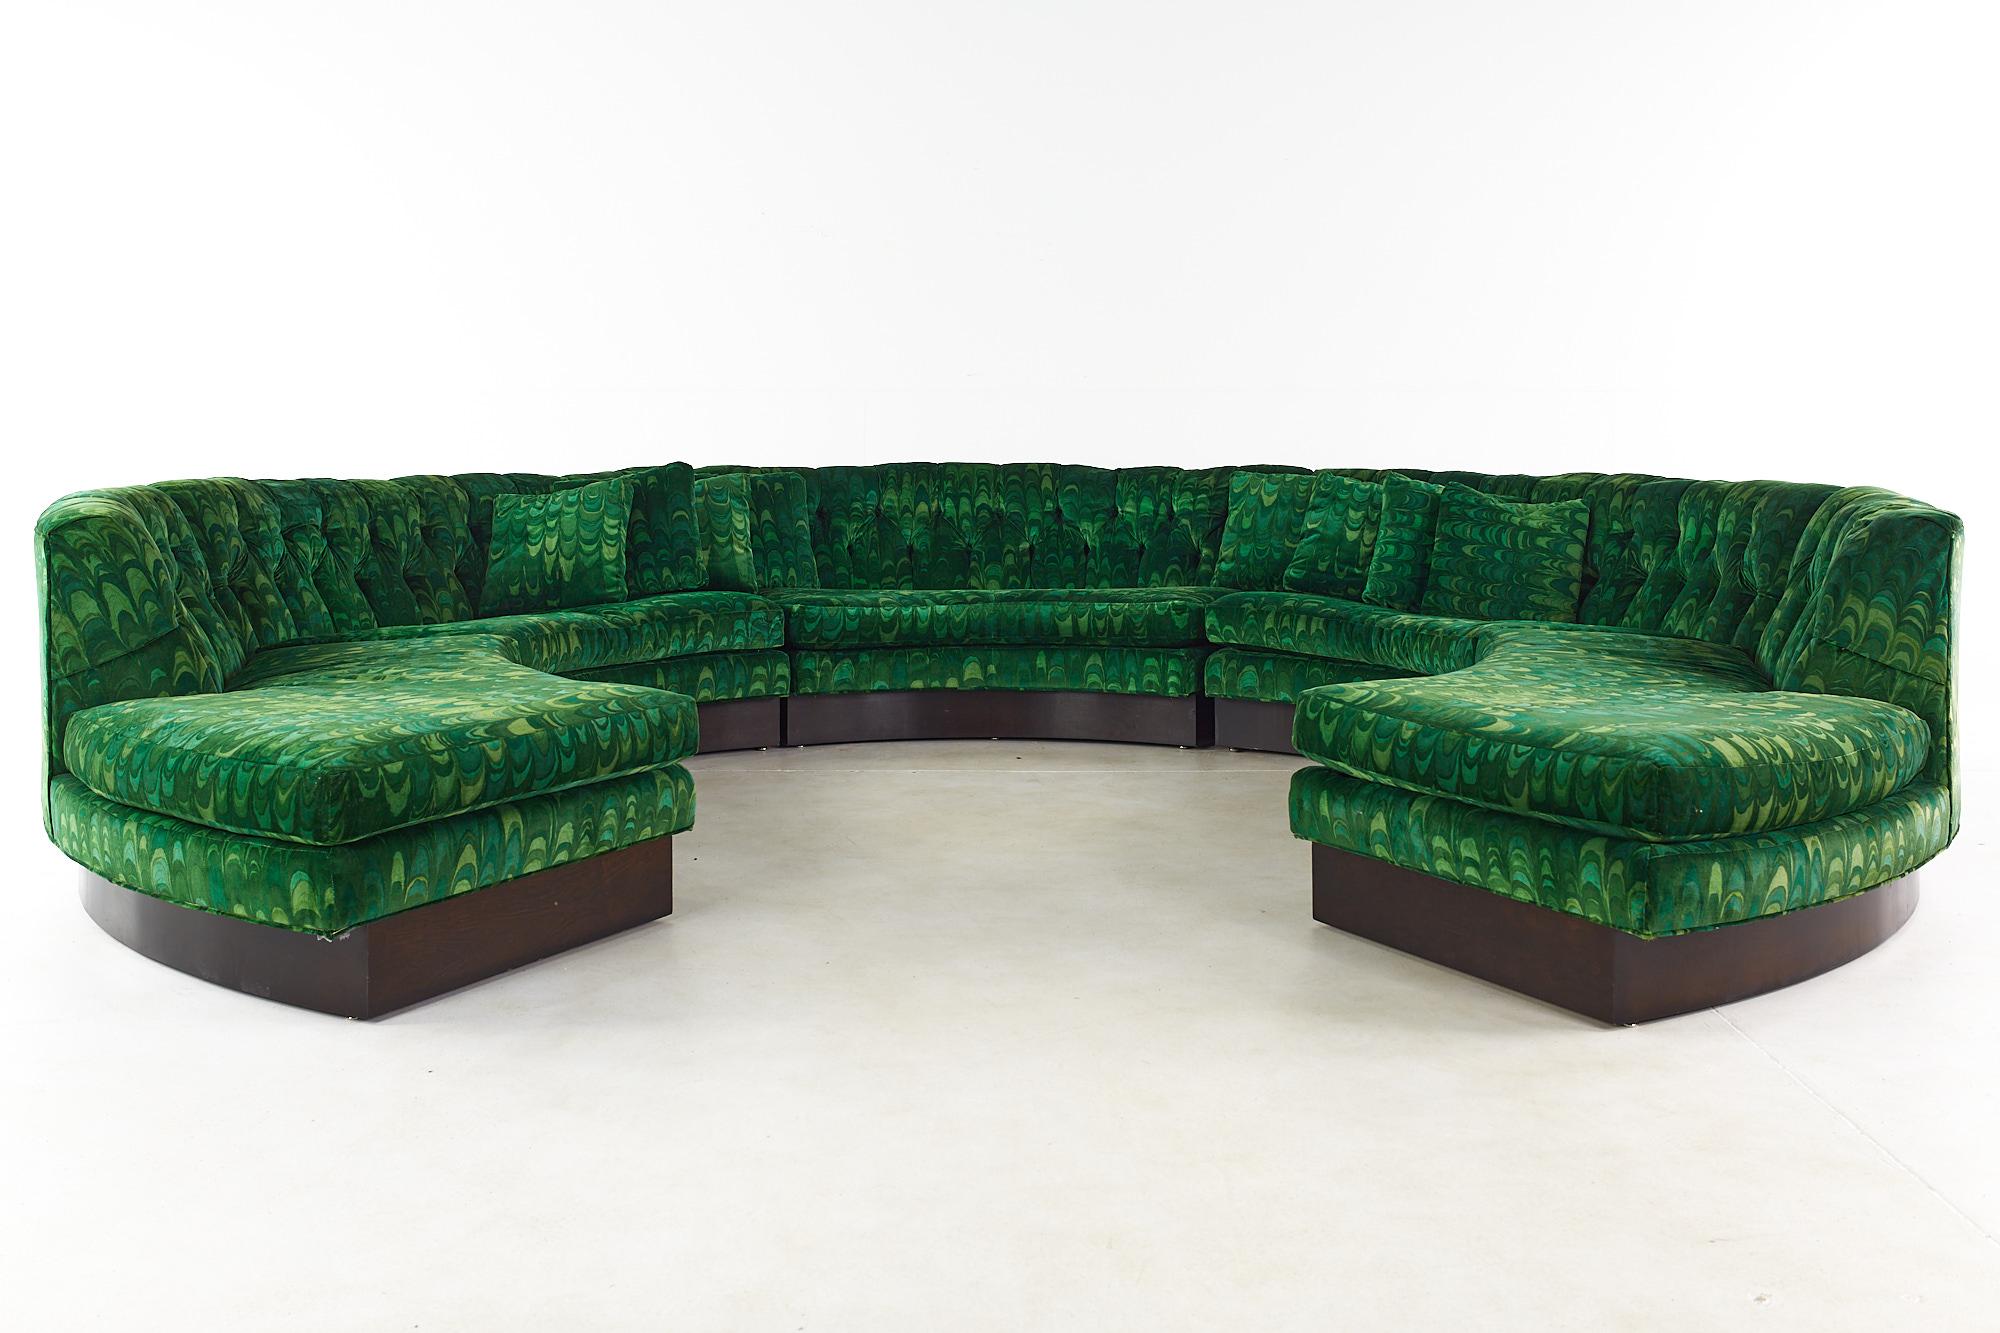 Erwin Lambeth midcentury circular sectional pit sofa with original jack Lenor Larsen Fabric.

This pit sofa measures: 150 wide x 150 deep x 27 inches high, with a seat height of 16 inches

All pieces of furniture can be had in what we call